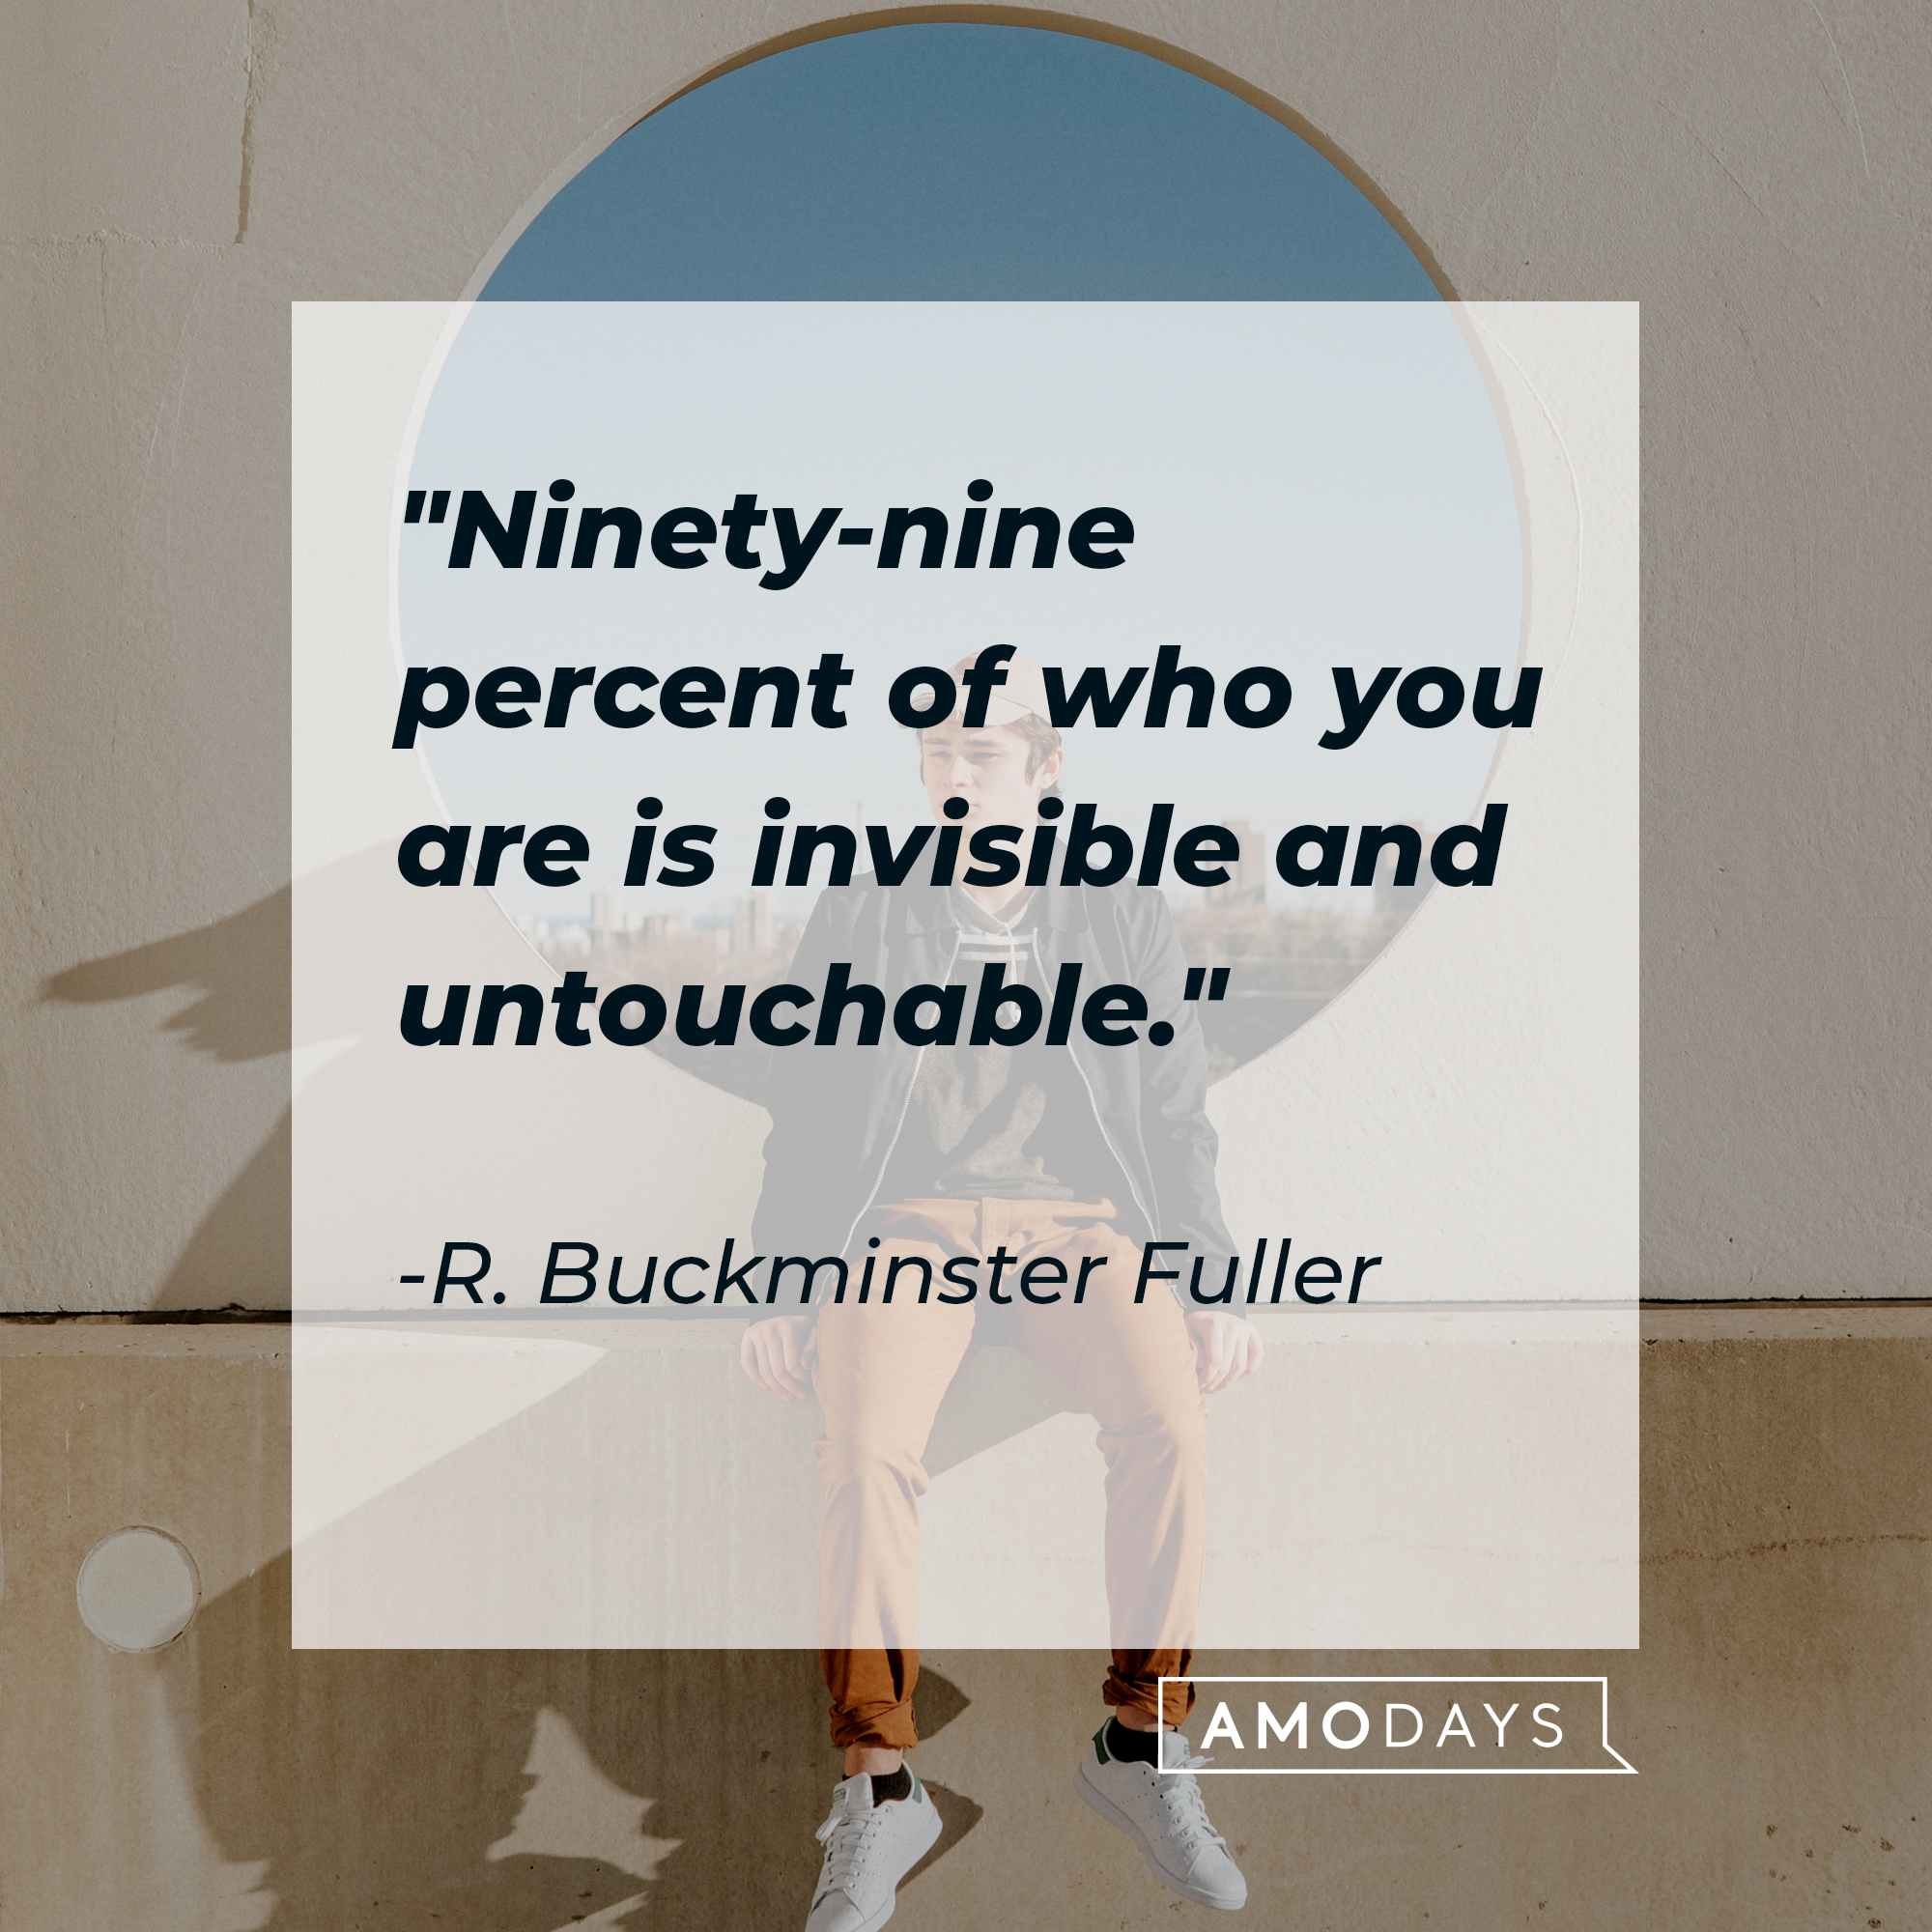 R. Buckminster Fuller's quote: "Ninety-nine percent of who you are is invisible and untouchable." | Source: Unsplash